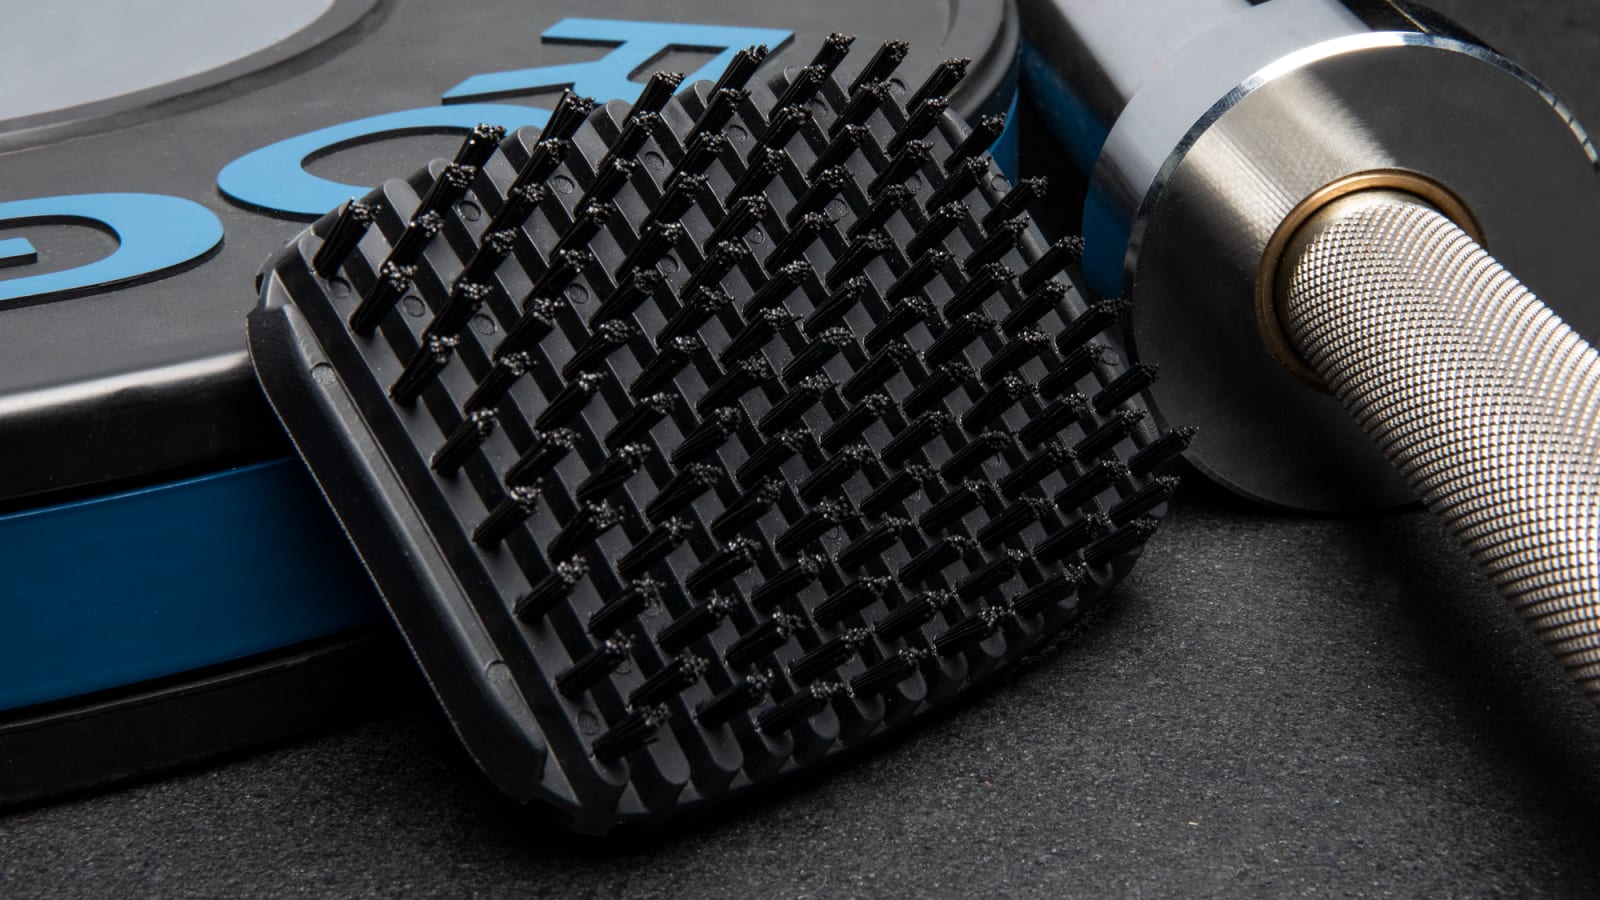 BEST Barbell Brush to Keep Your Gym Clean (360° with Nylon